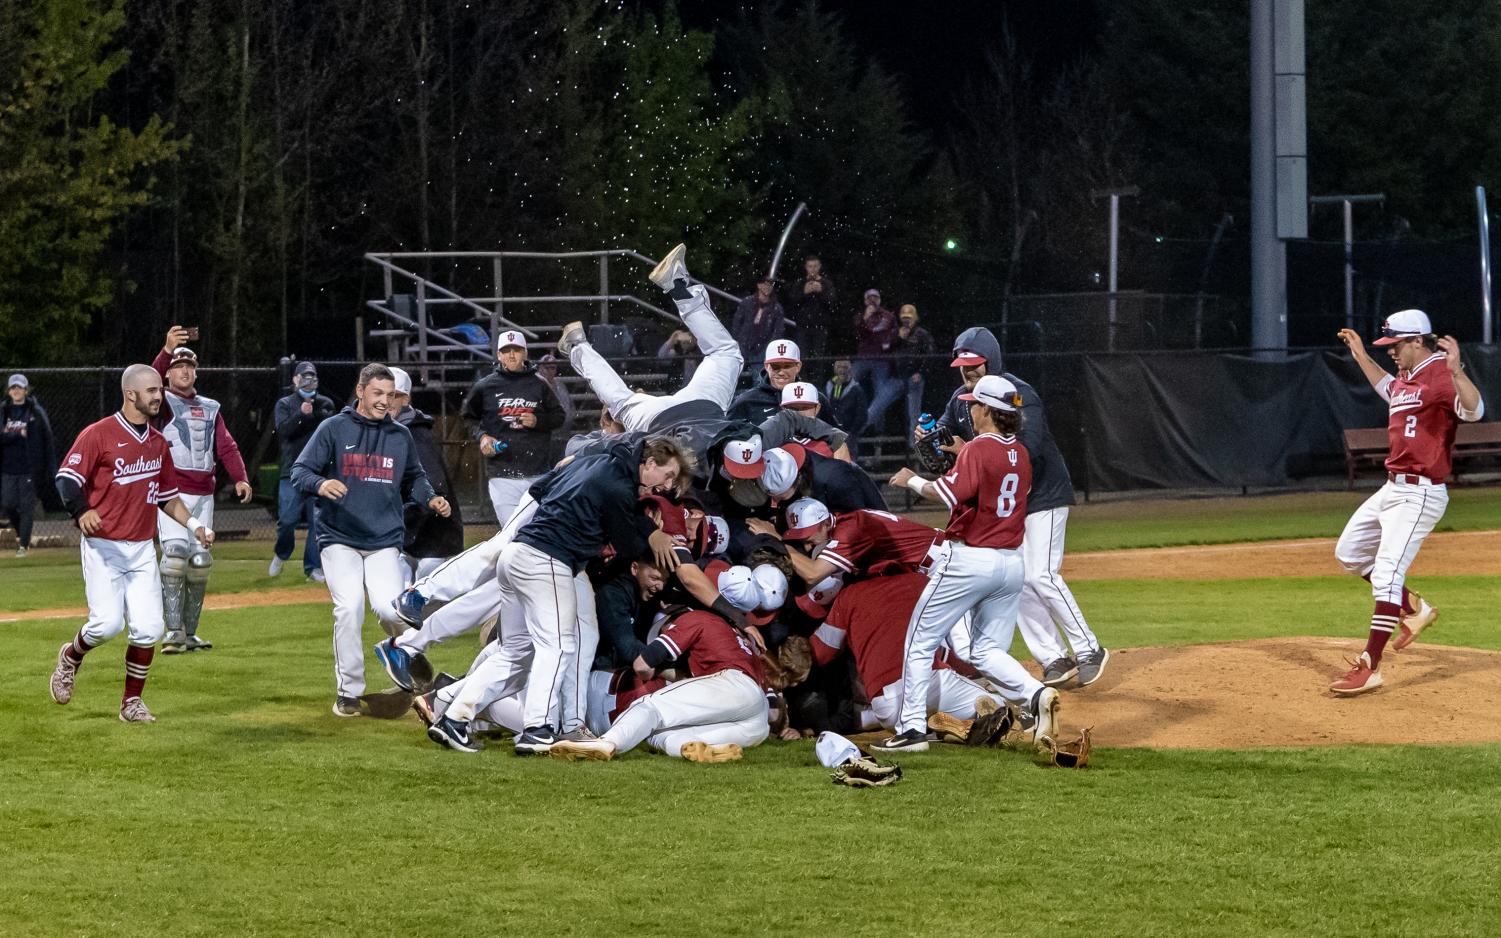 The IU Southeast Baseball team dogpiles in front of the pitchers mound after sophomore right-hander Drew Hensley finishes off a complete-game against Midway on April 23. The 6-2 victory, which came in the nightcap of a doubleheader, clinched the Grenadiers third consecutive RSC Regular-Season title and their fifth-straight trip to the NAIA Opening Round.